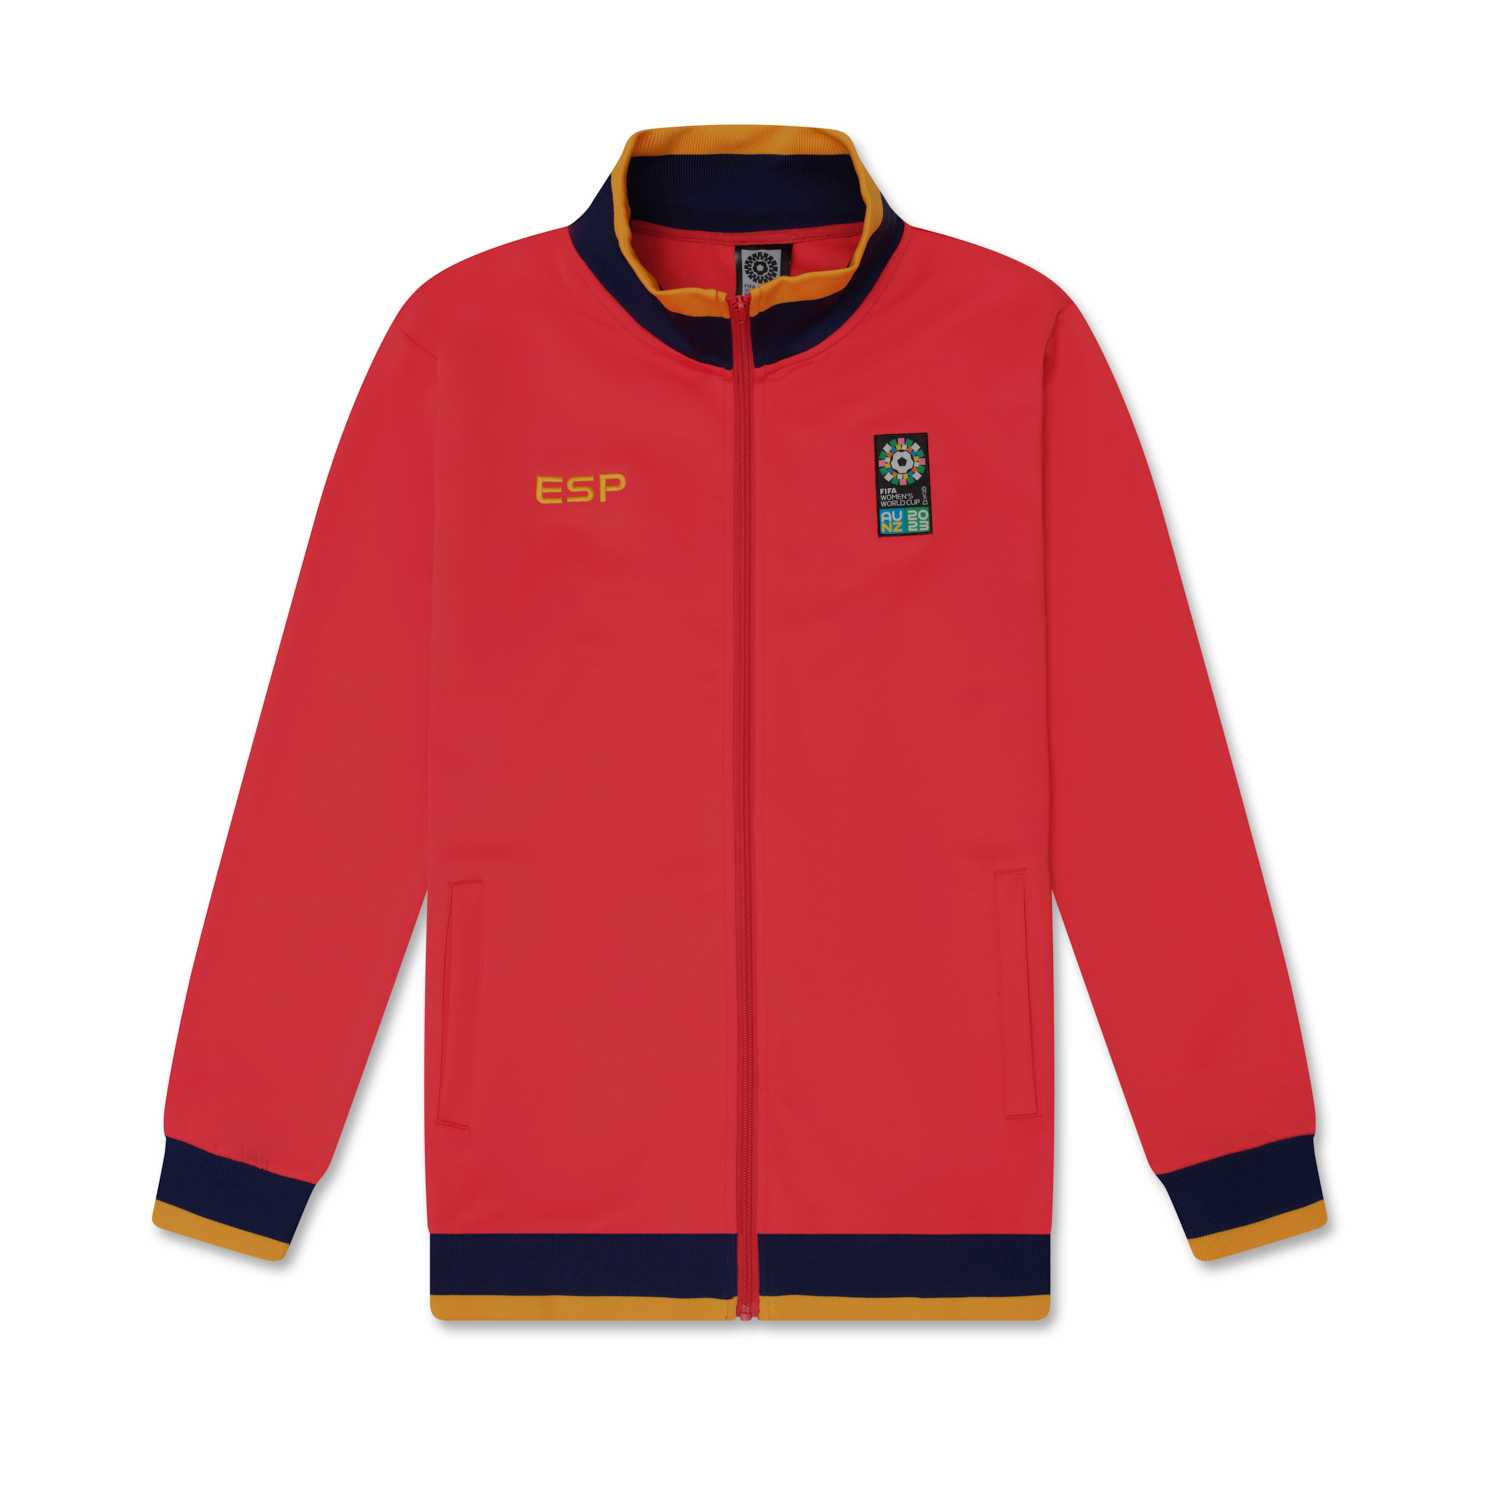 Spain Women's World Cup 2023 Red Jacket - Unisex